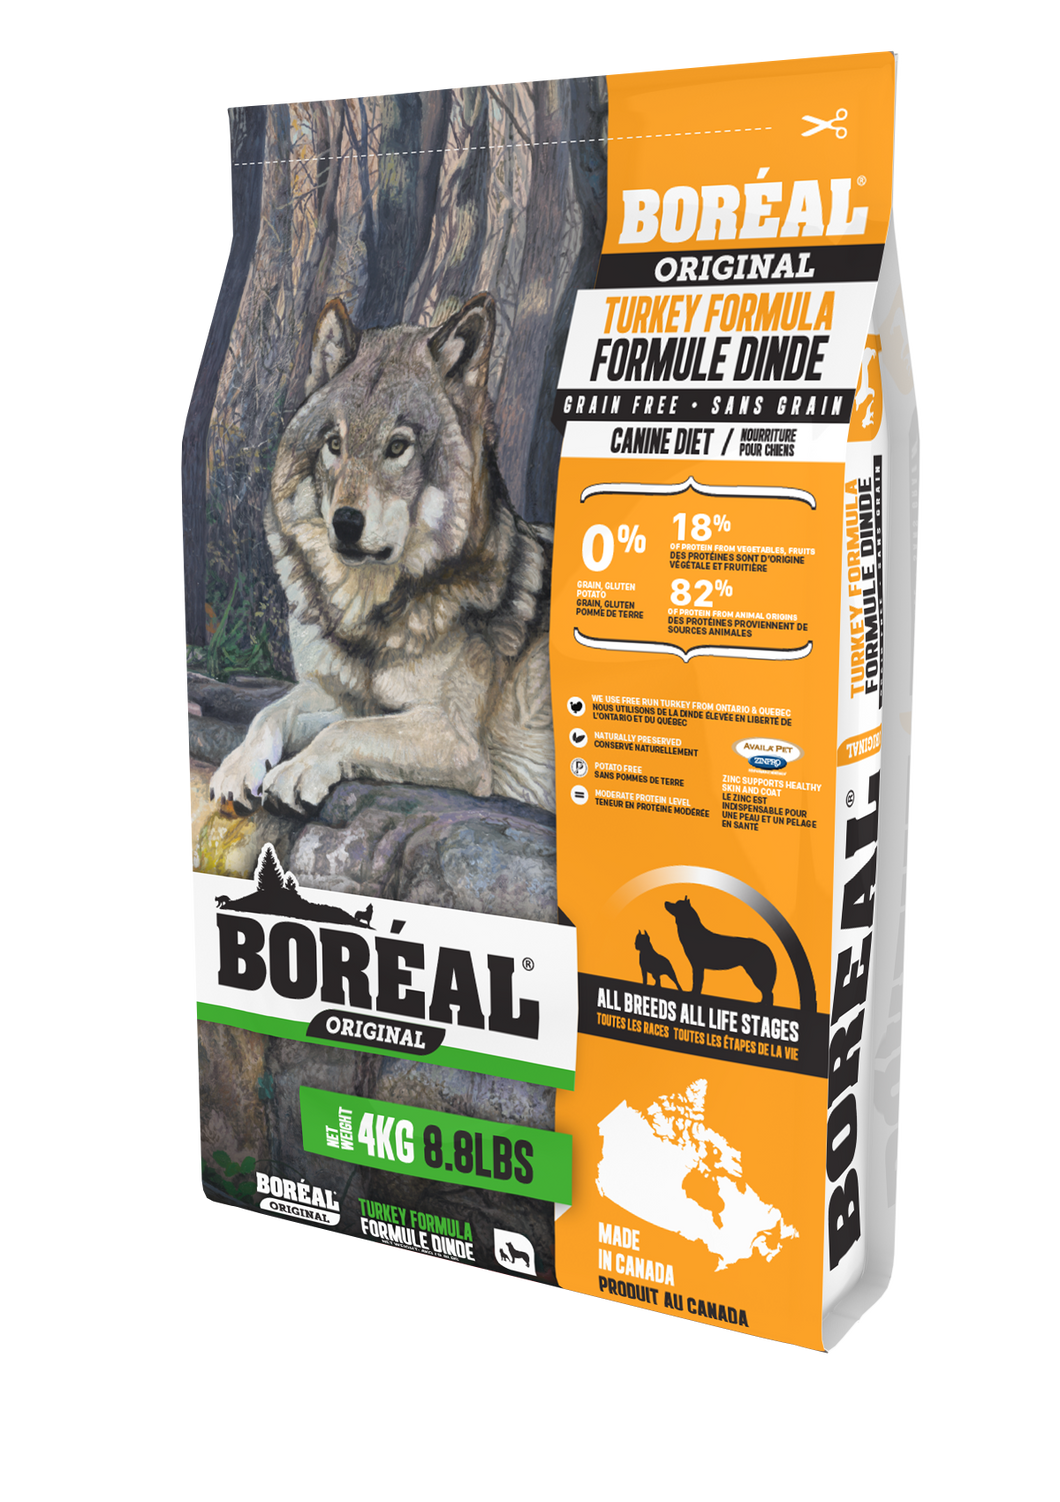 Boréal - Original Turkey Grain Free Dog Food - All Breed - Ontario & Quebec Free Run Chicken - Low Glycemic - Limited Ingredient - Naturally Preserved - Potato Free - Made in Canada